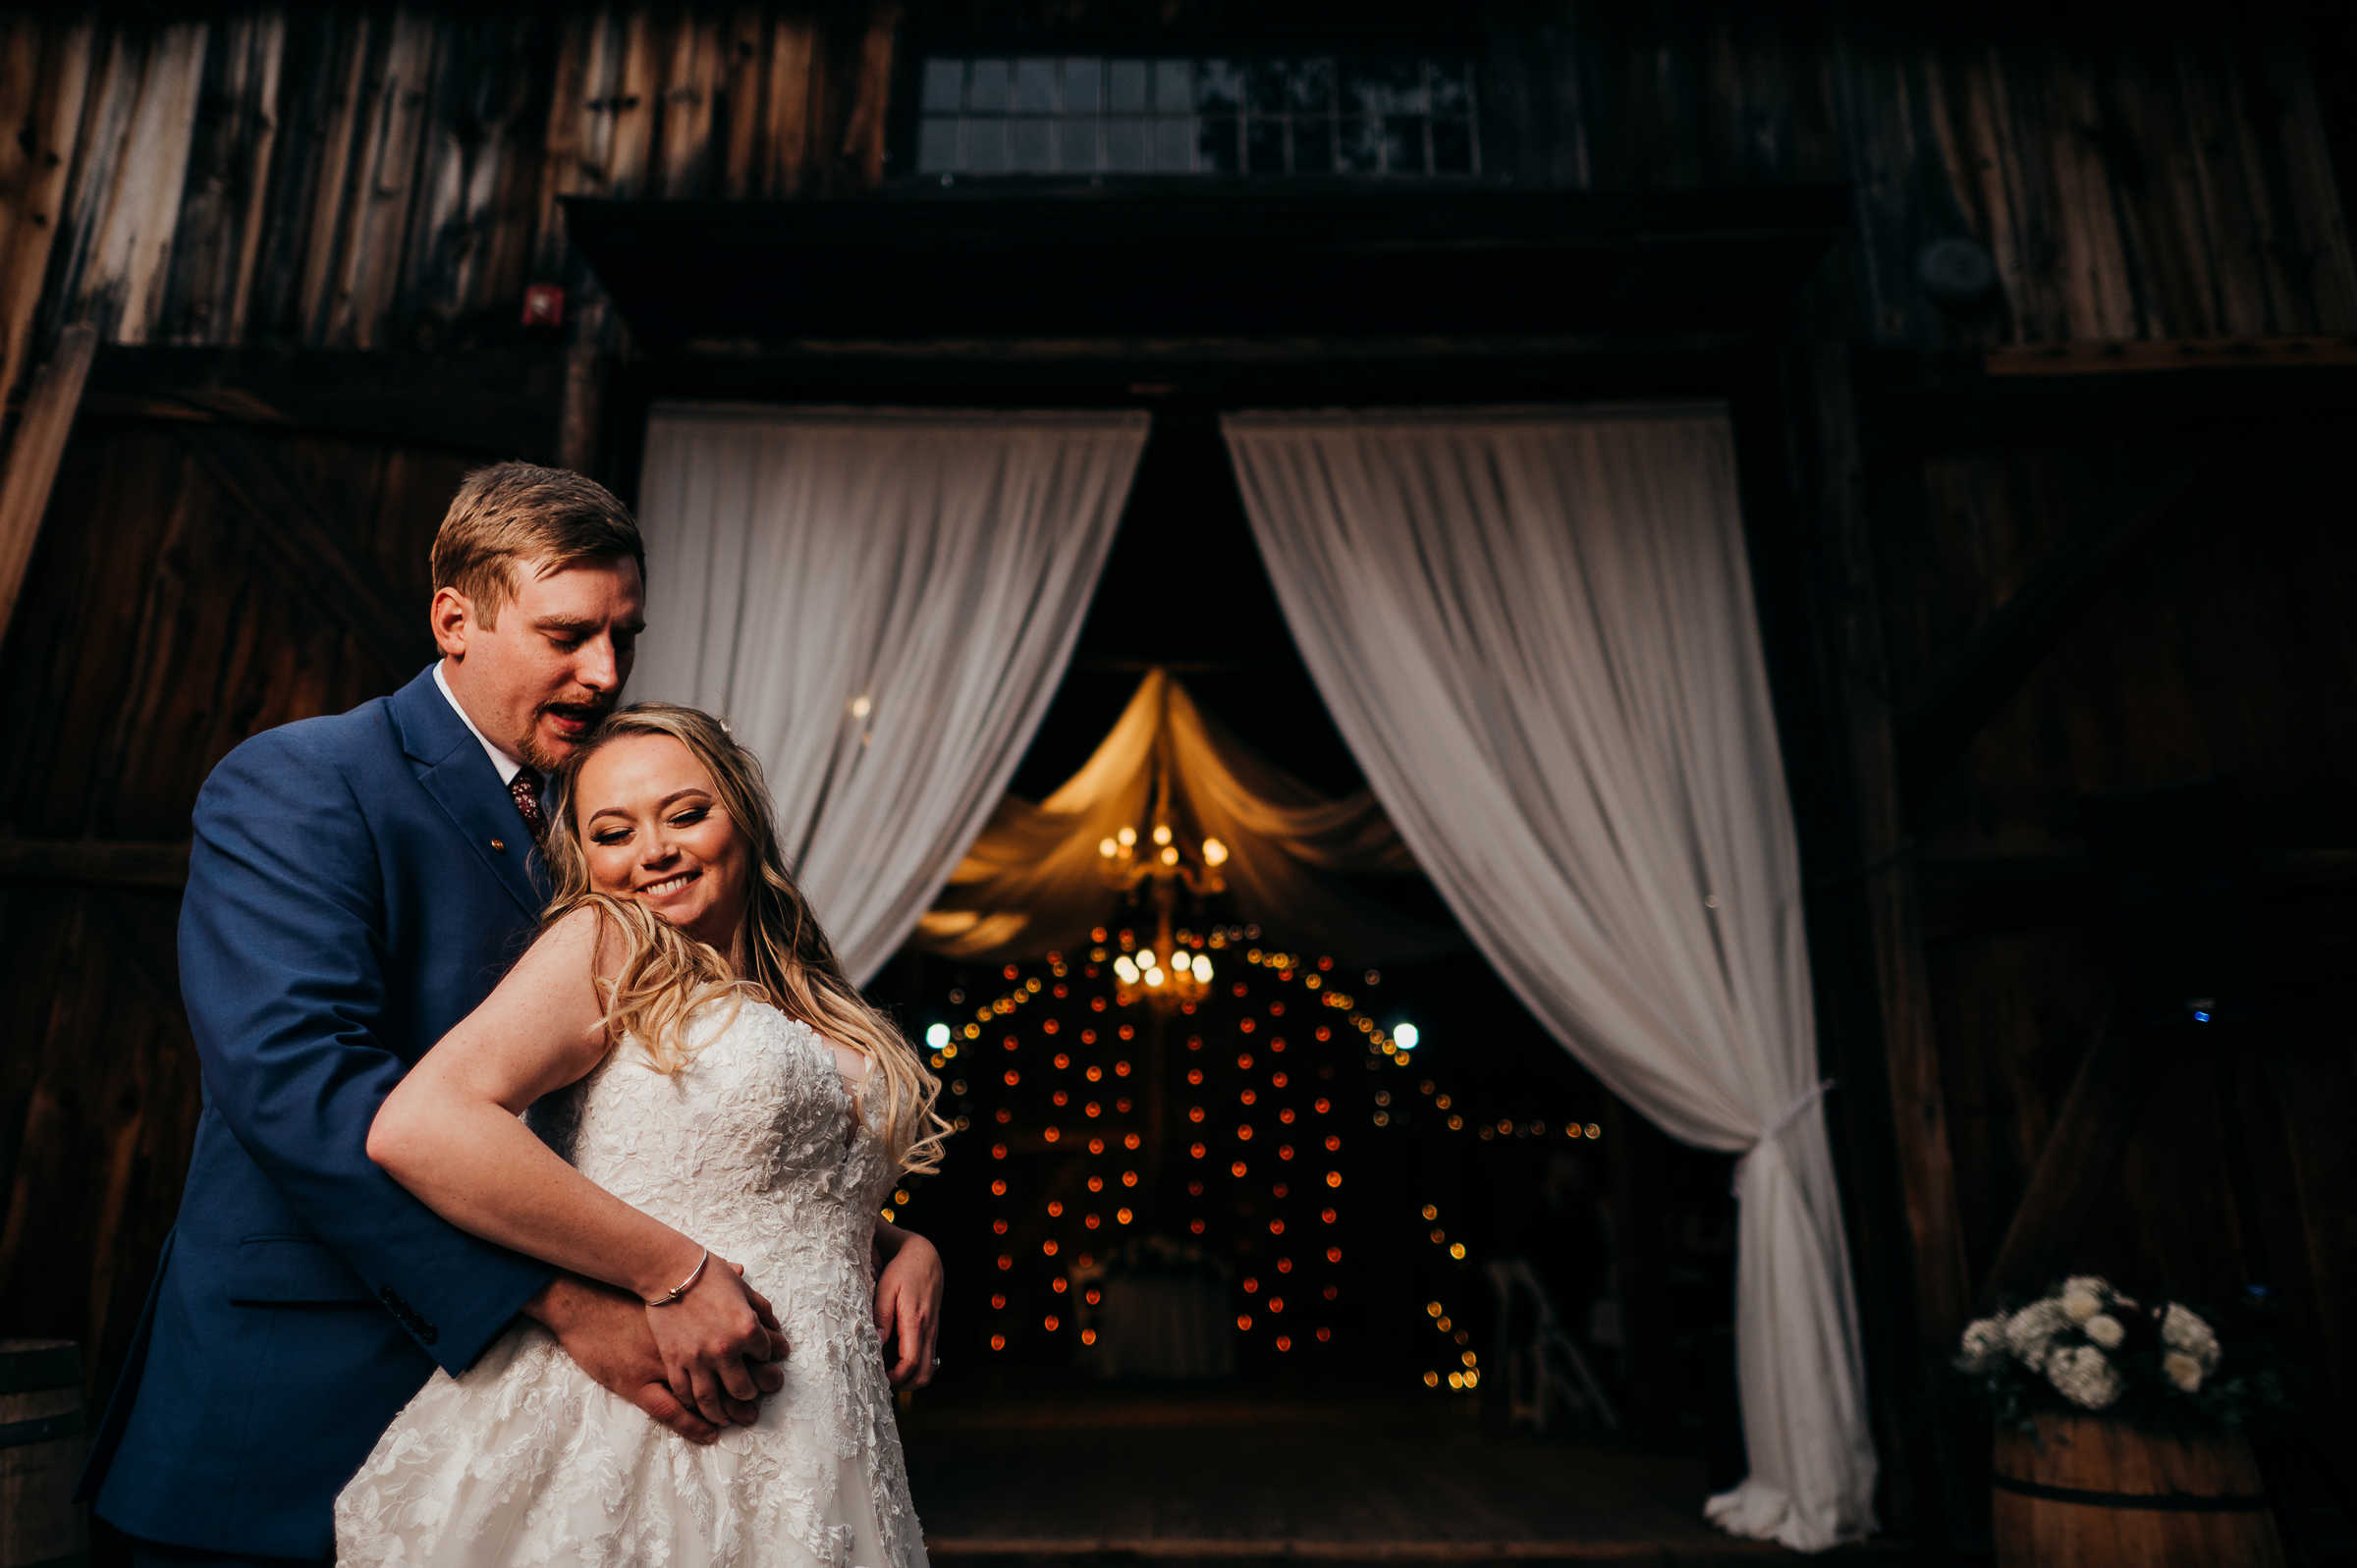 A bride and groom embrace together in front of the barn wedding venue in Connecticut.